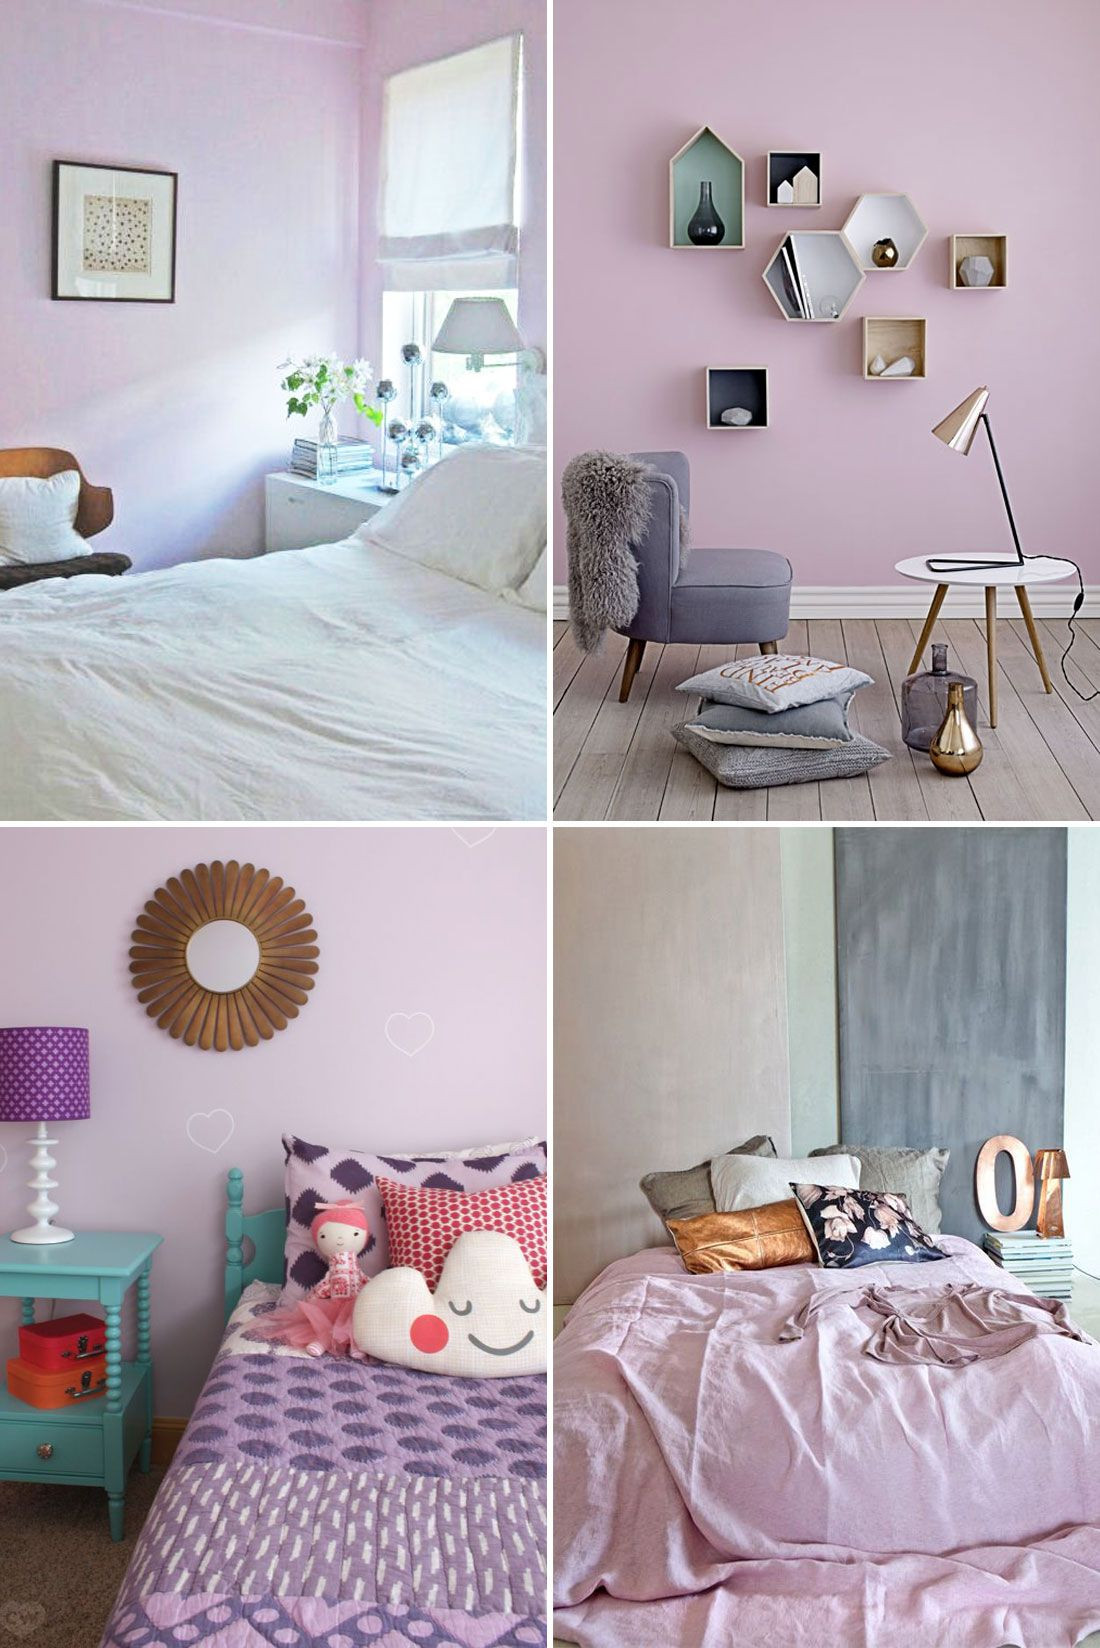 Relaxation Colors For Bedroom
 The 3 Most Relaxing Colors for Your Bedroom